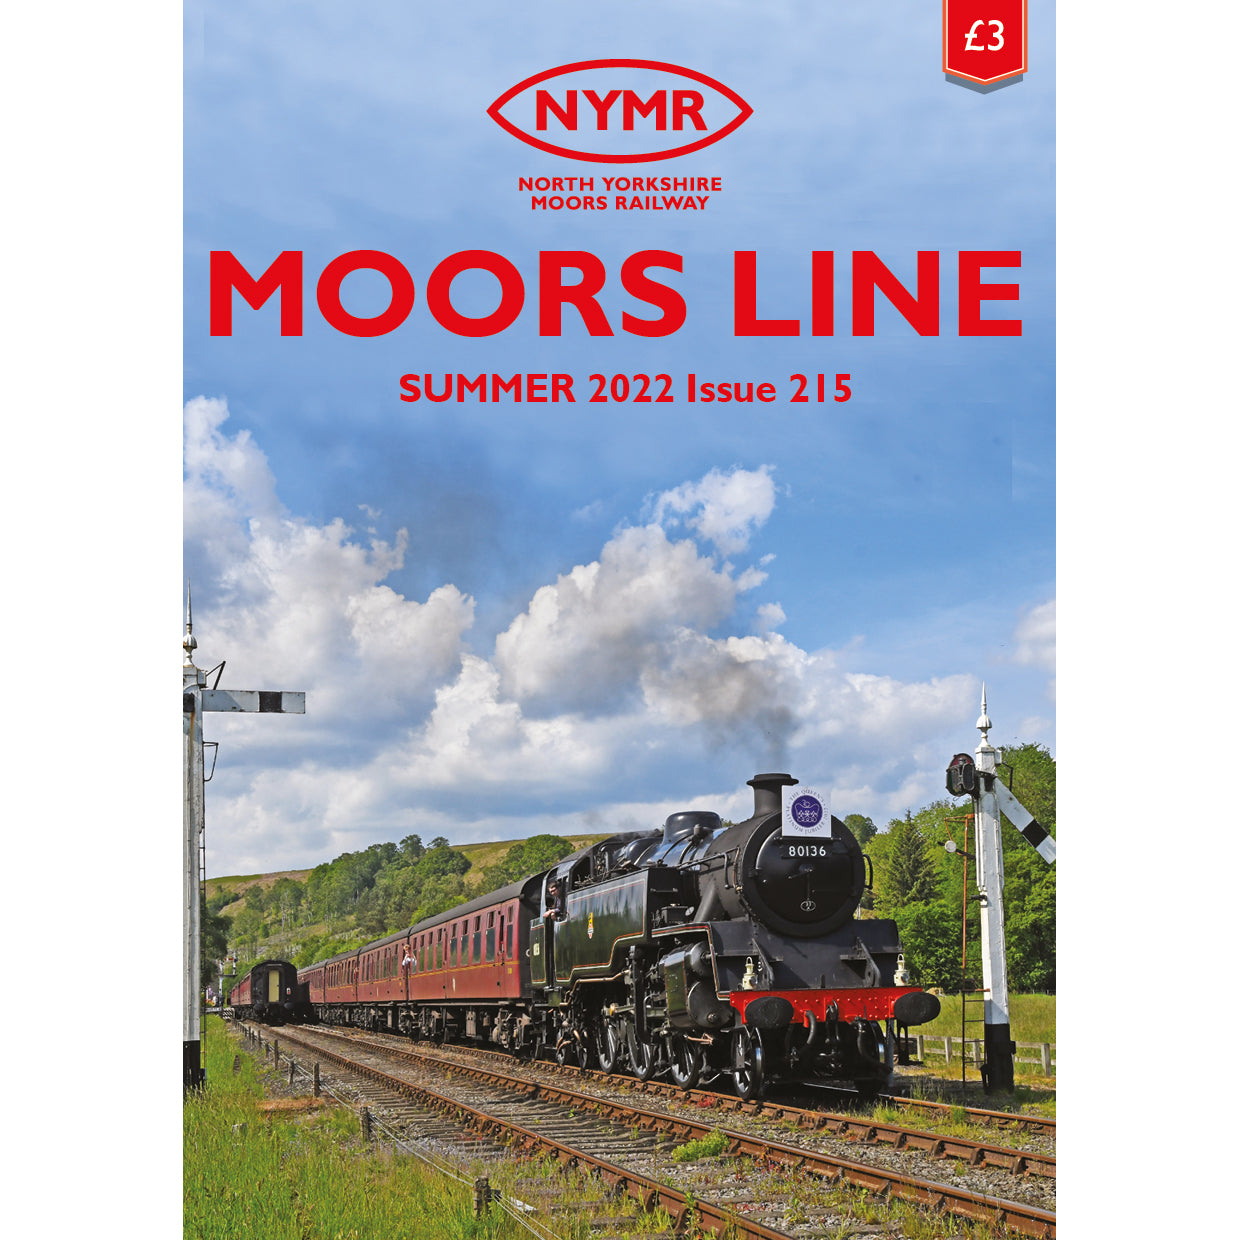 Front cover of N Y M R Moors Line Summer 2022 Issue 215 showing photo of steam train number 80136 with countryside and blue sky.